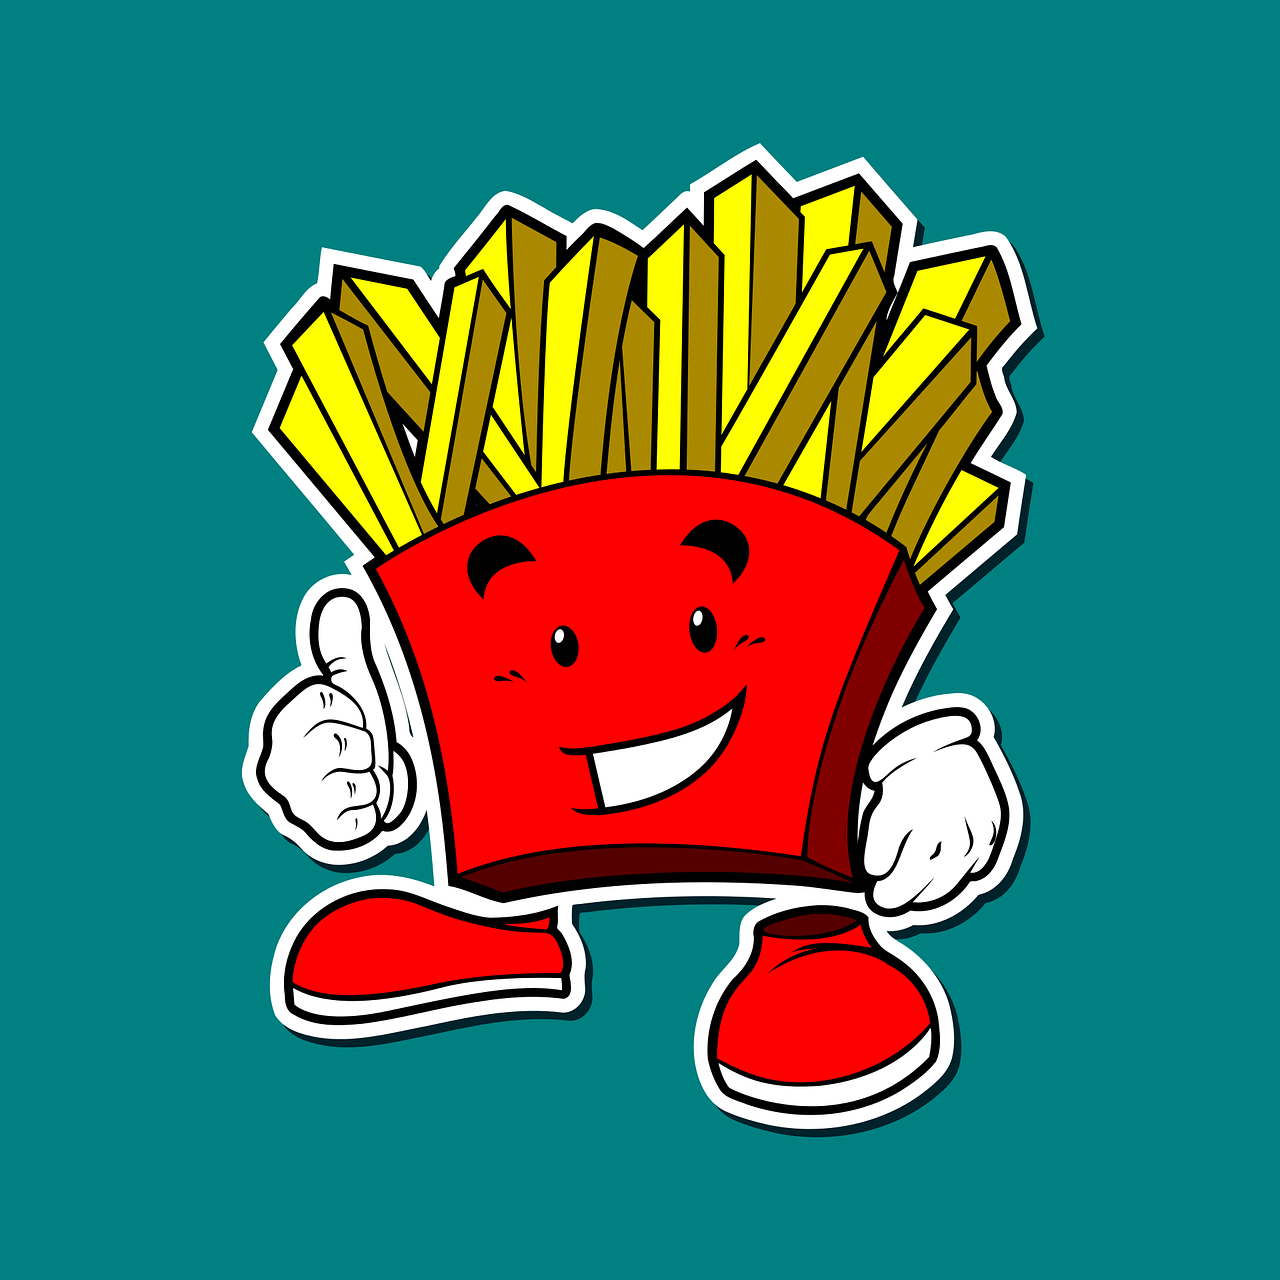 a cartoon french fries character with thumbs up, inspired by Pia Fries, pop art, fantasy sticker illustration, nice colors, 8 k cartoon illustration, vector images